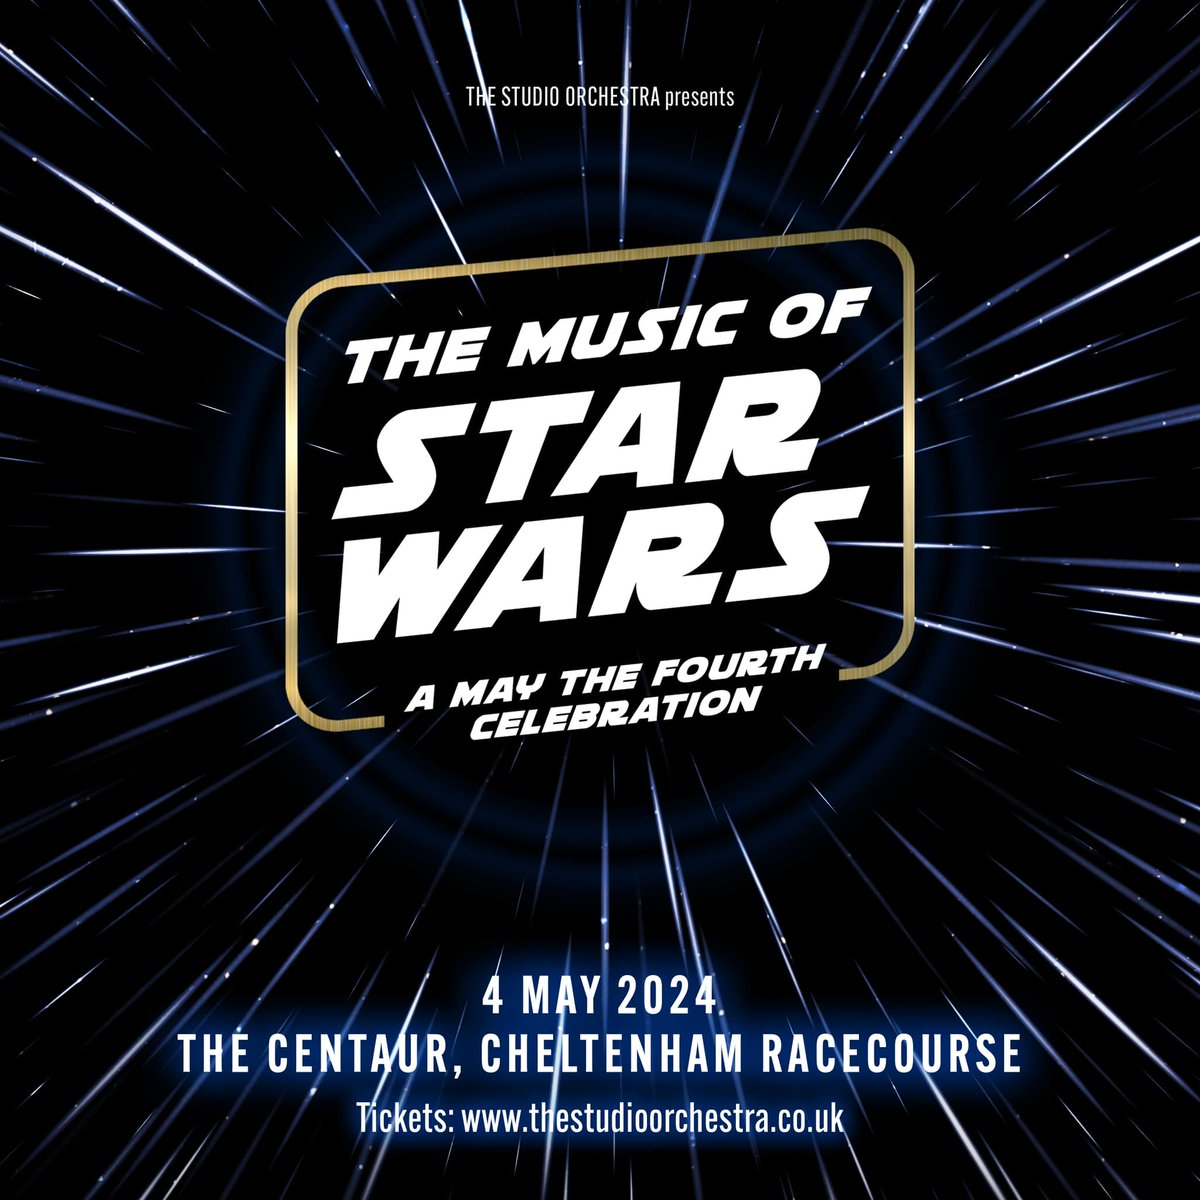 The Music of Star Wars - A May The Fourth Celebration - The Studio Orchestra soundtrackfest.com/en/micro/the-m… Concierto ‘The Music of Star Wars - A May The Fourth Celebration’ - The Studio Orchestra soundtrackfest.com/es/micro/conci… @studio_orch @jackcampey @CheltenhamRaces